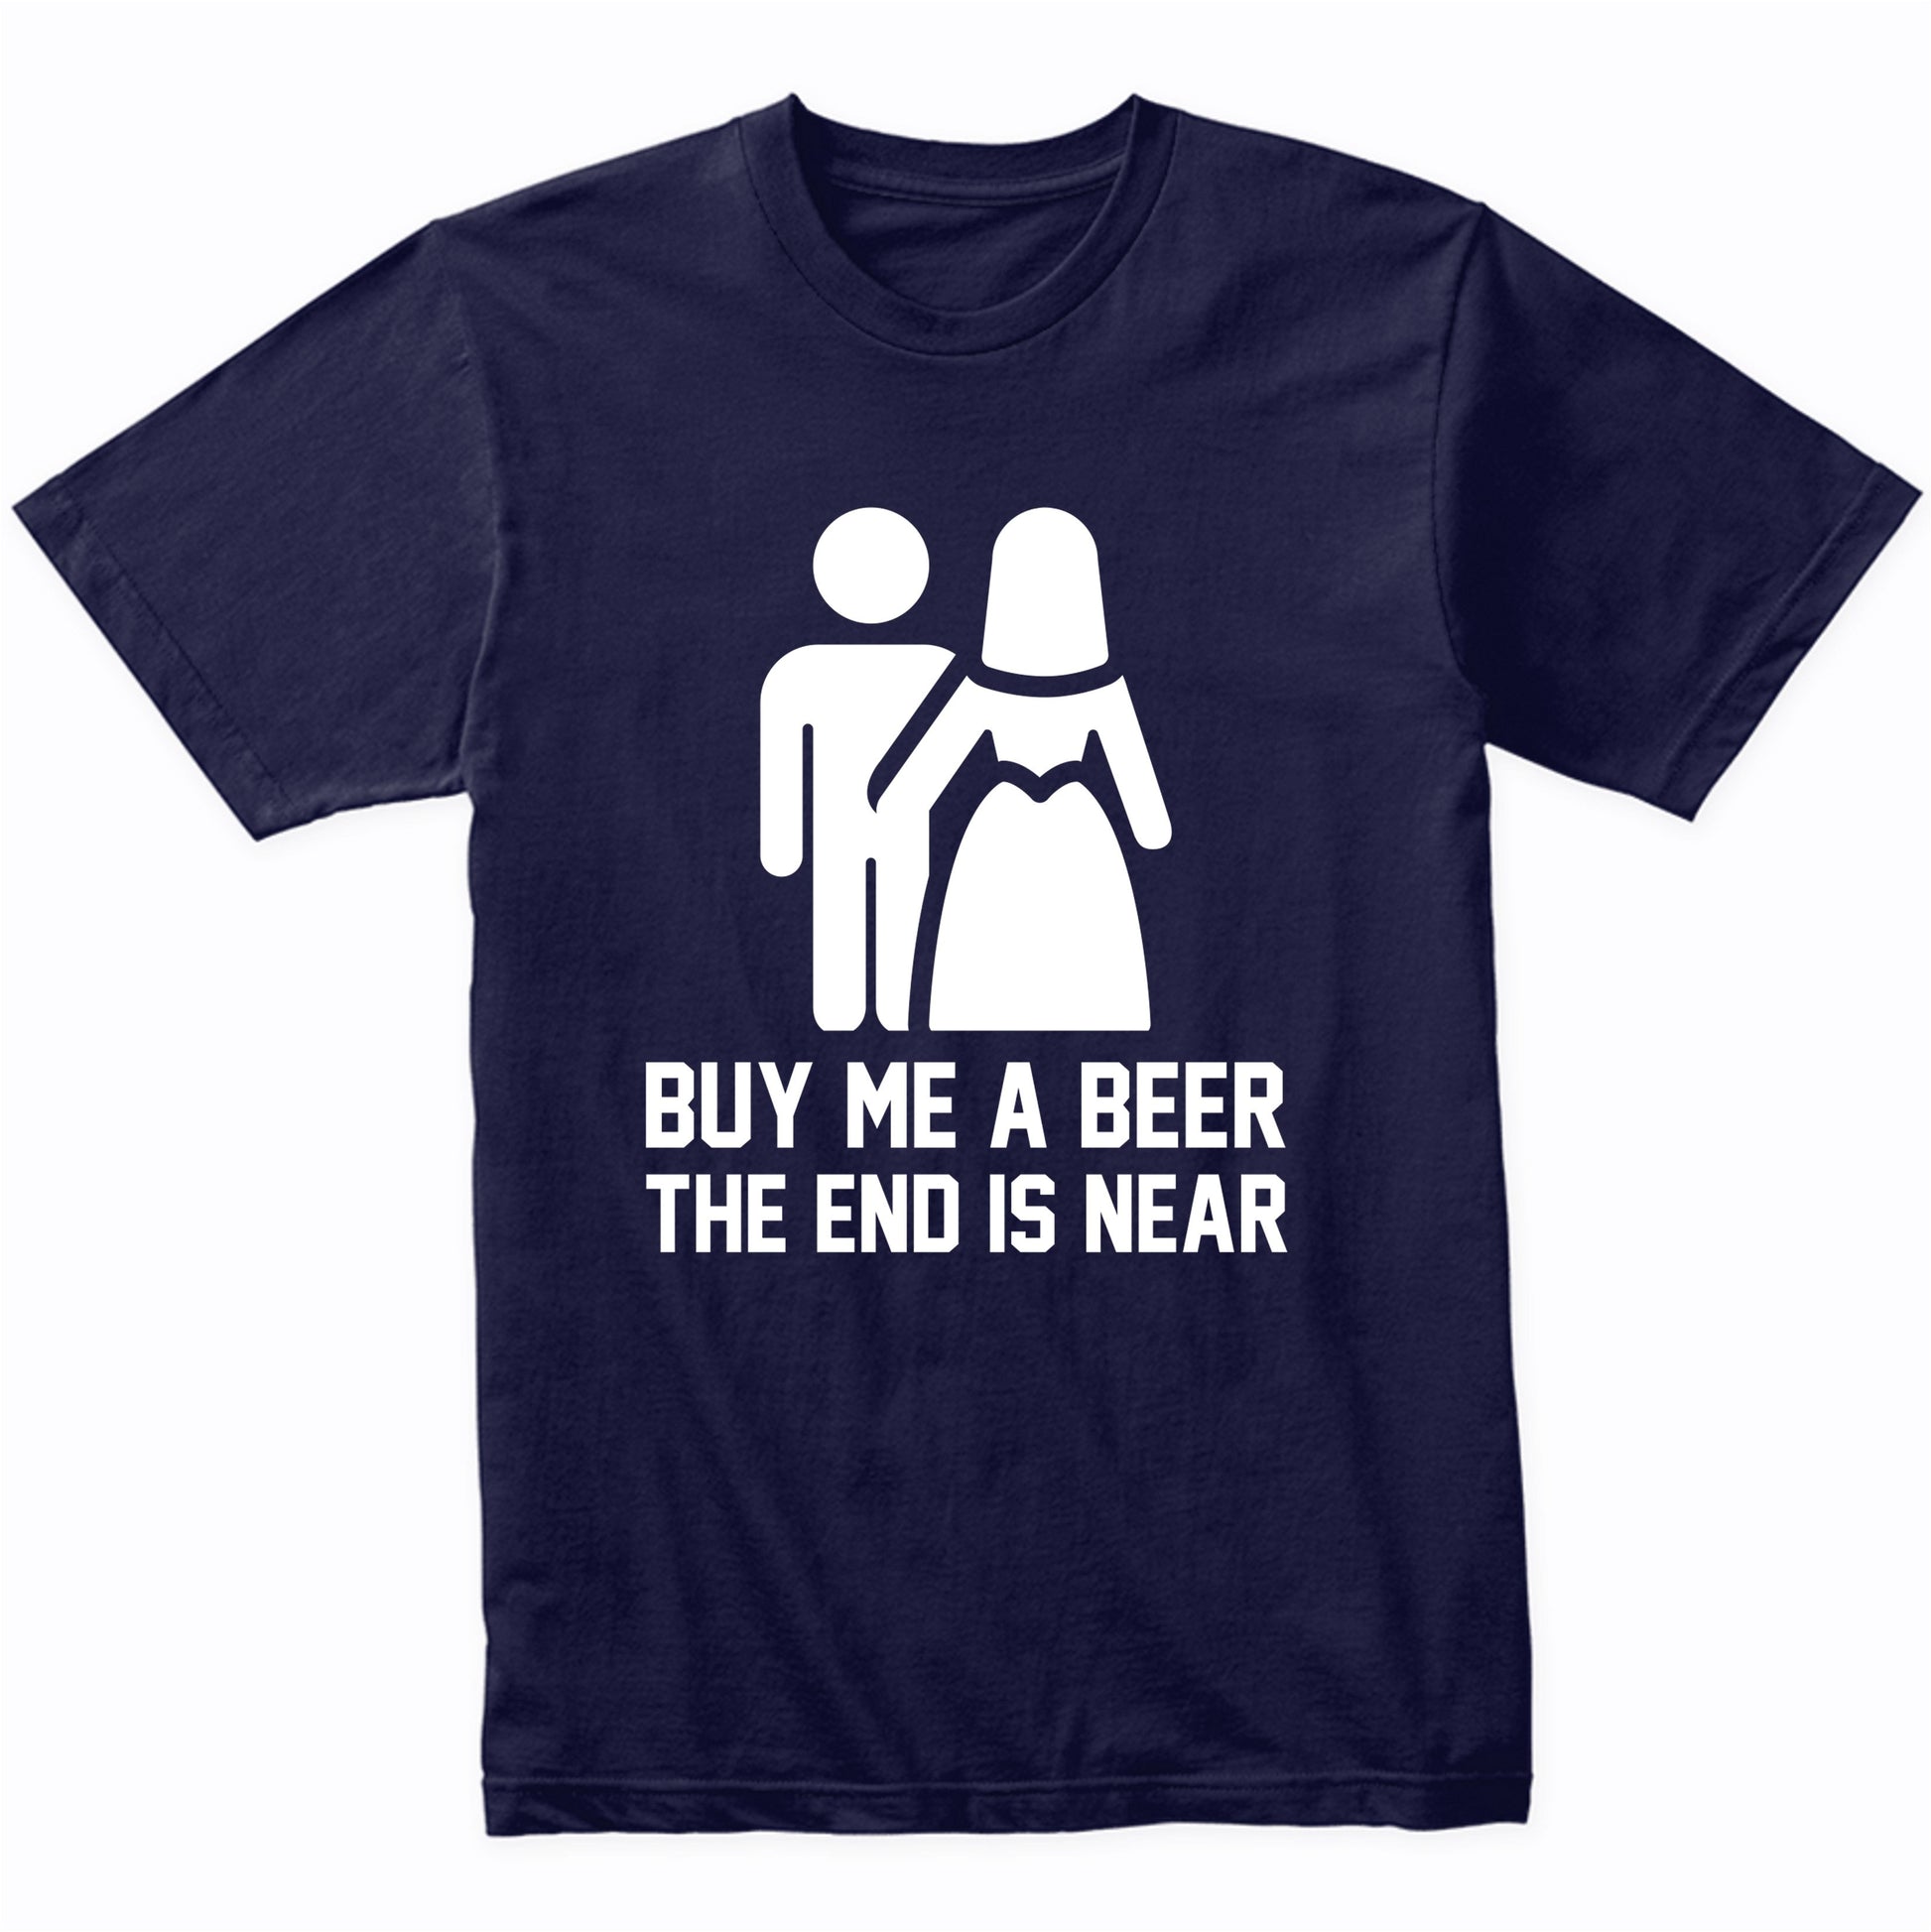 Funny Bachelor Party Shirt Buy Me A Beer The End Is Near